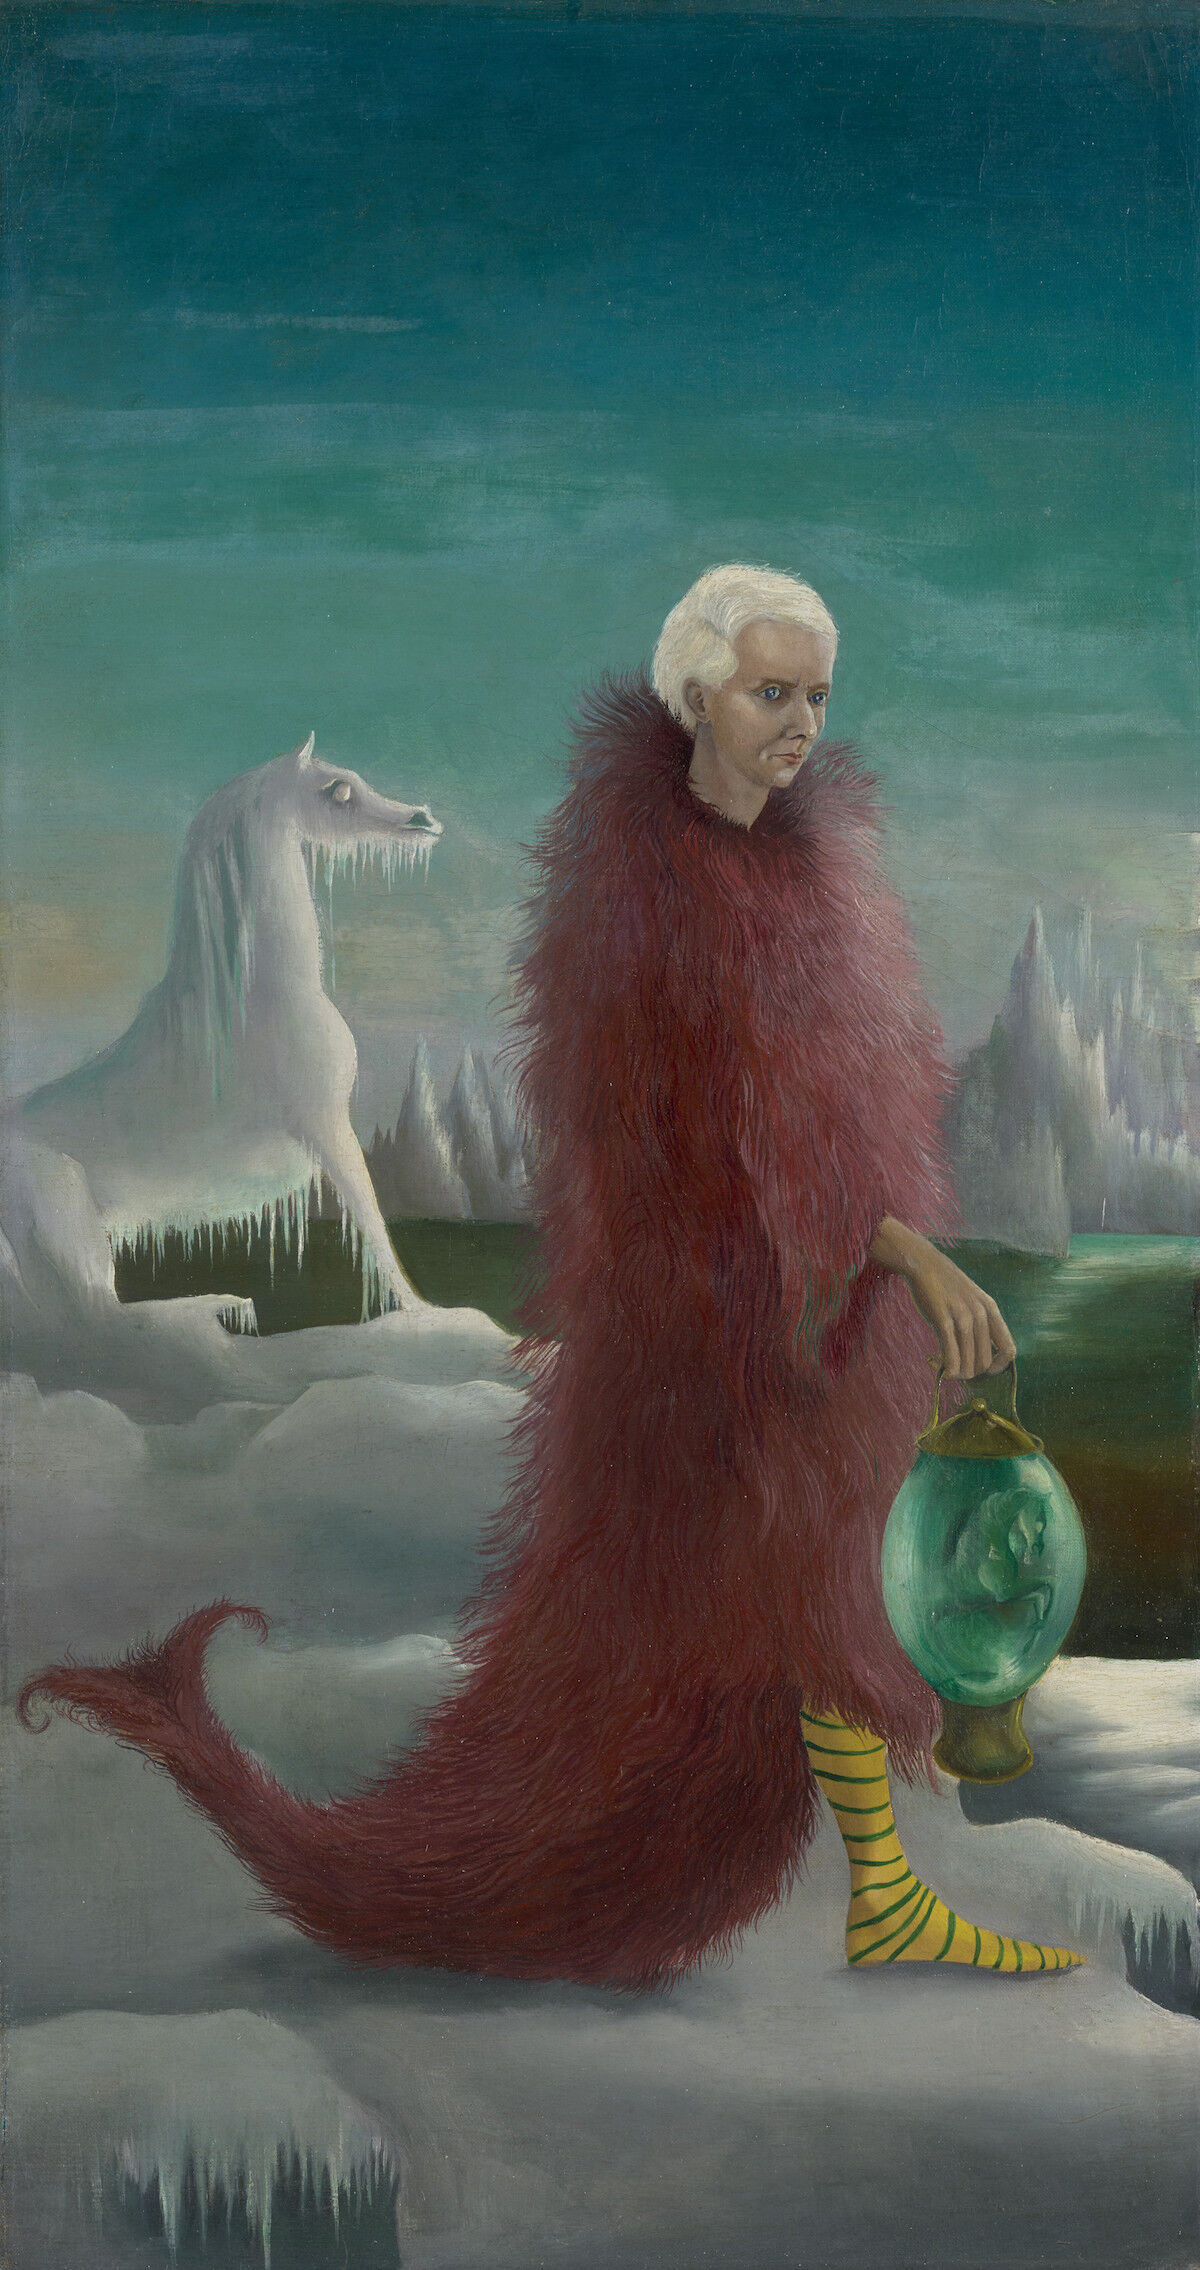 Leonora Carrington's Surrealist portrait of Max Ernst acquired by National Galleries of Scotland.